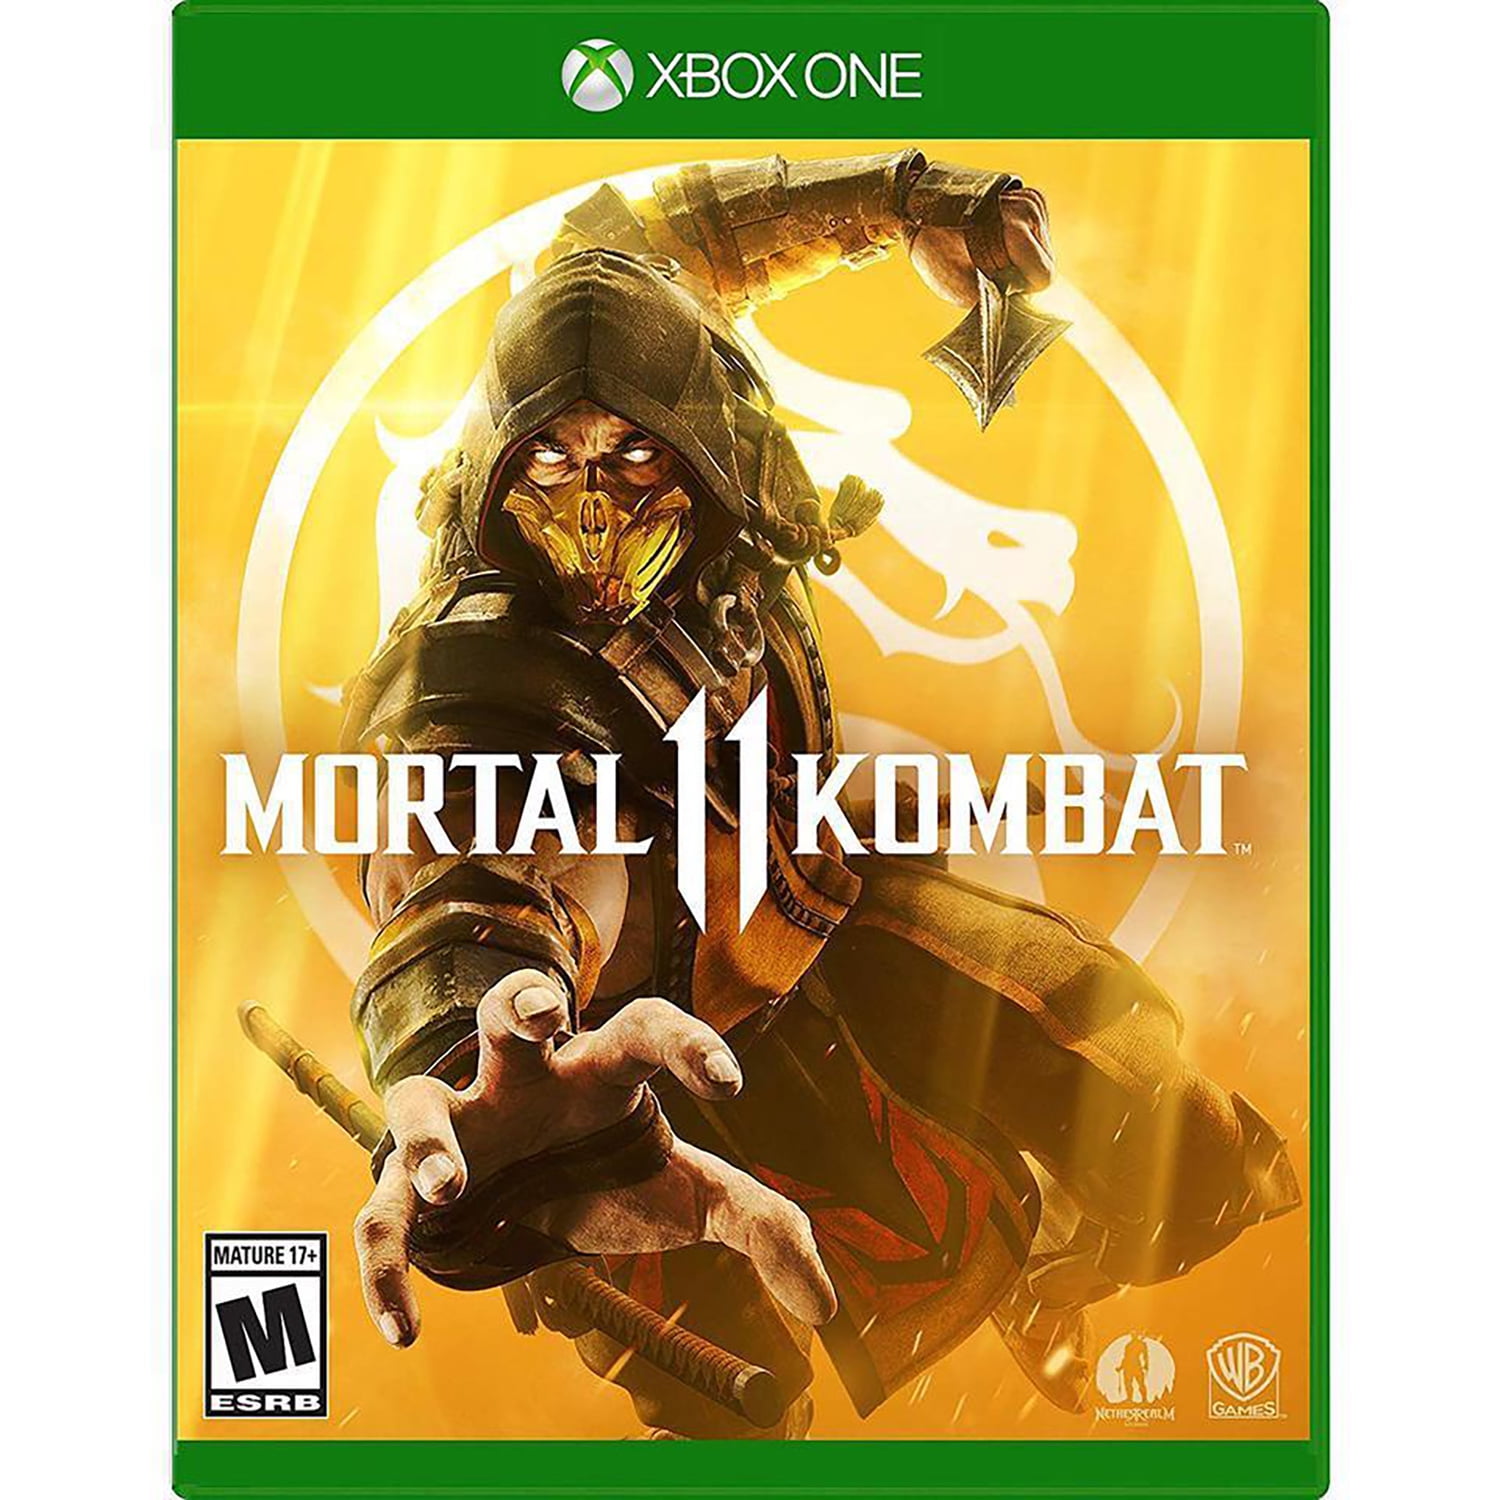 xbox one games on sale at walmart